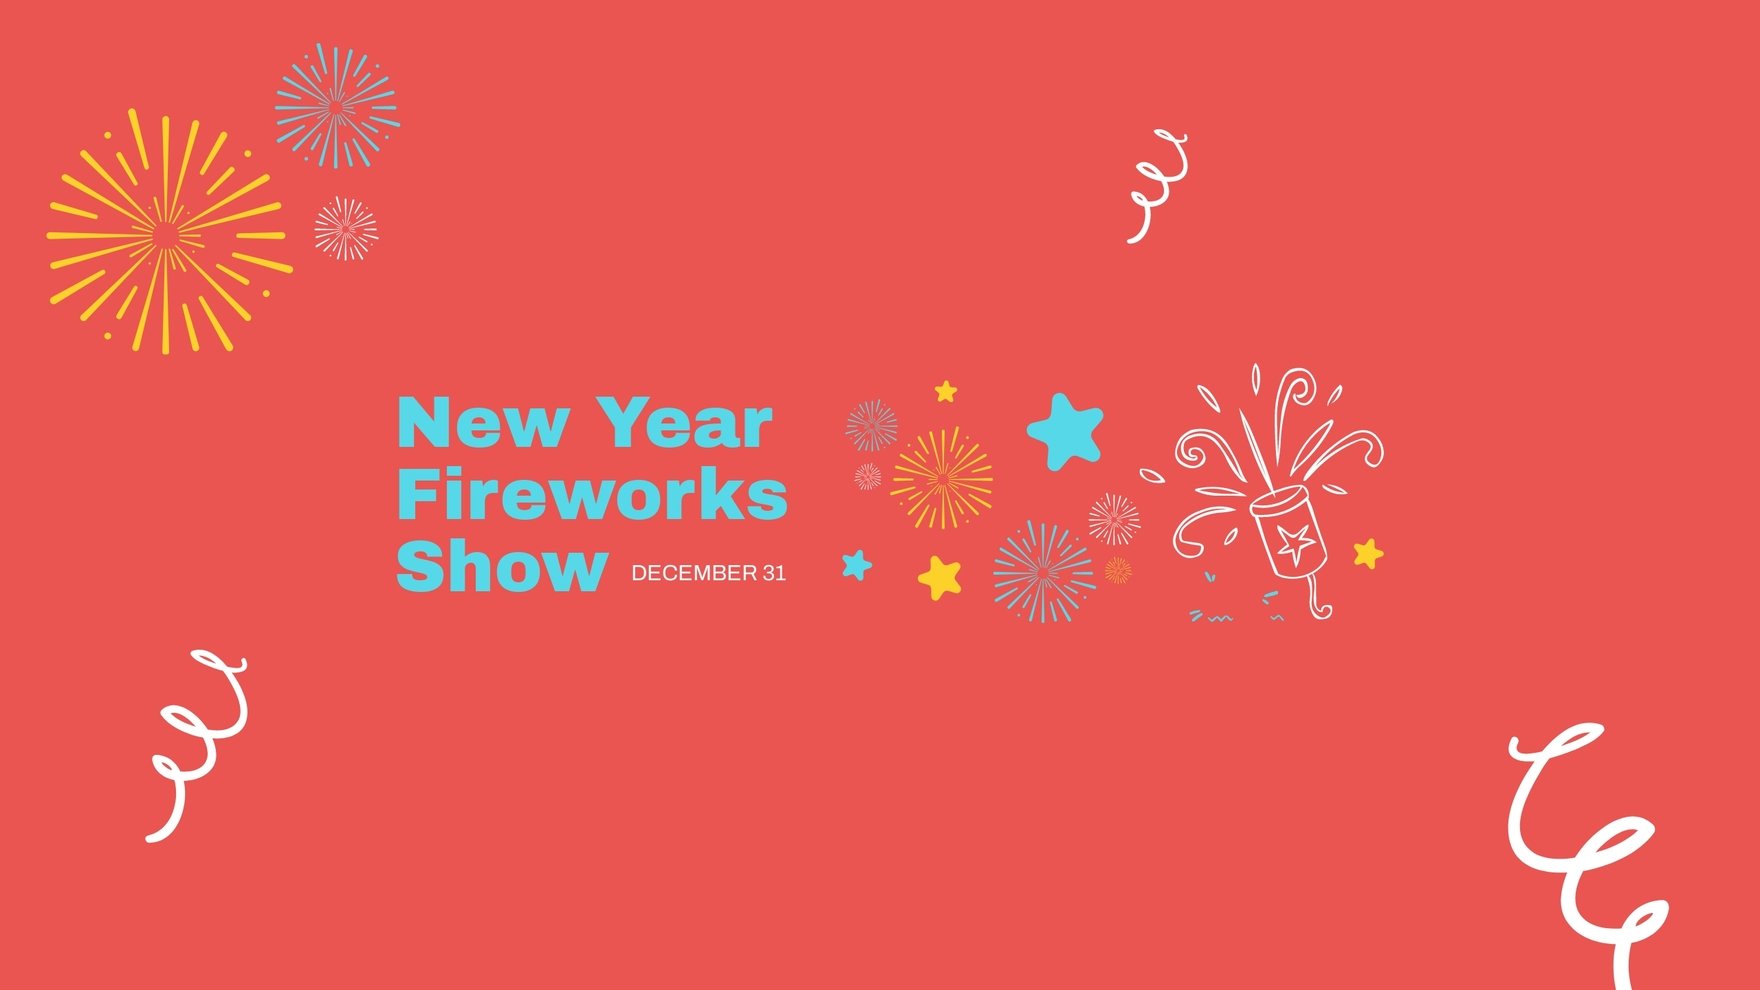 New Year Fireworks Show Youtube Banner Template